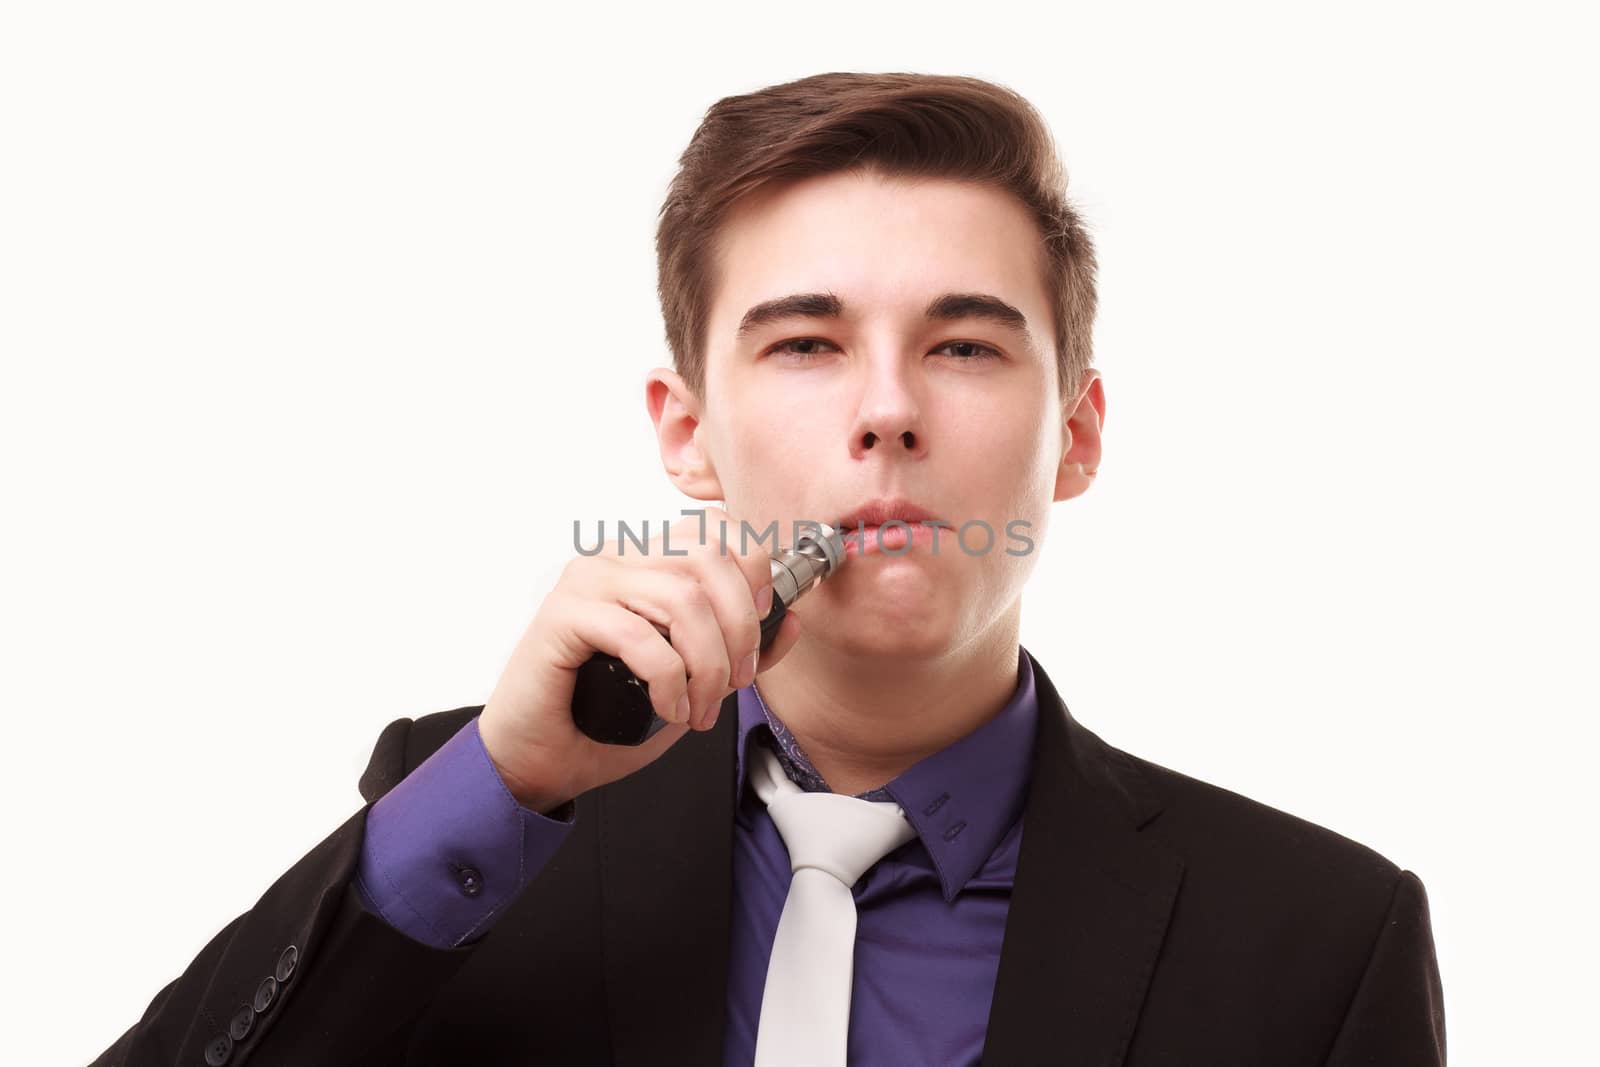 Portrait of a man in suit smoking an e-cigarette by DmitryOsipov